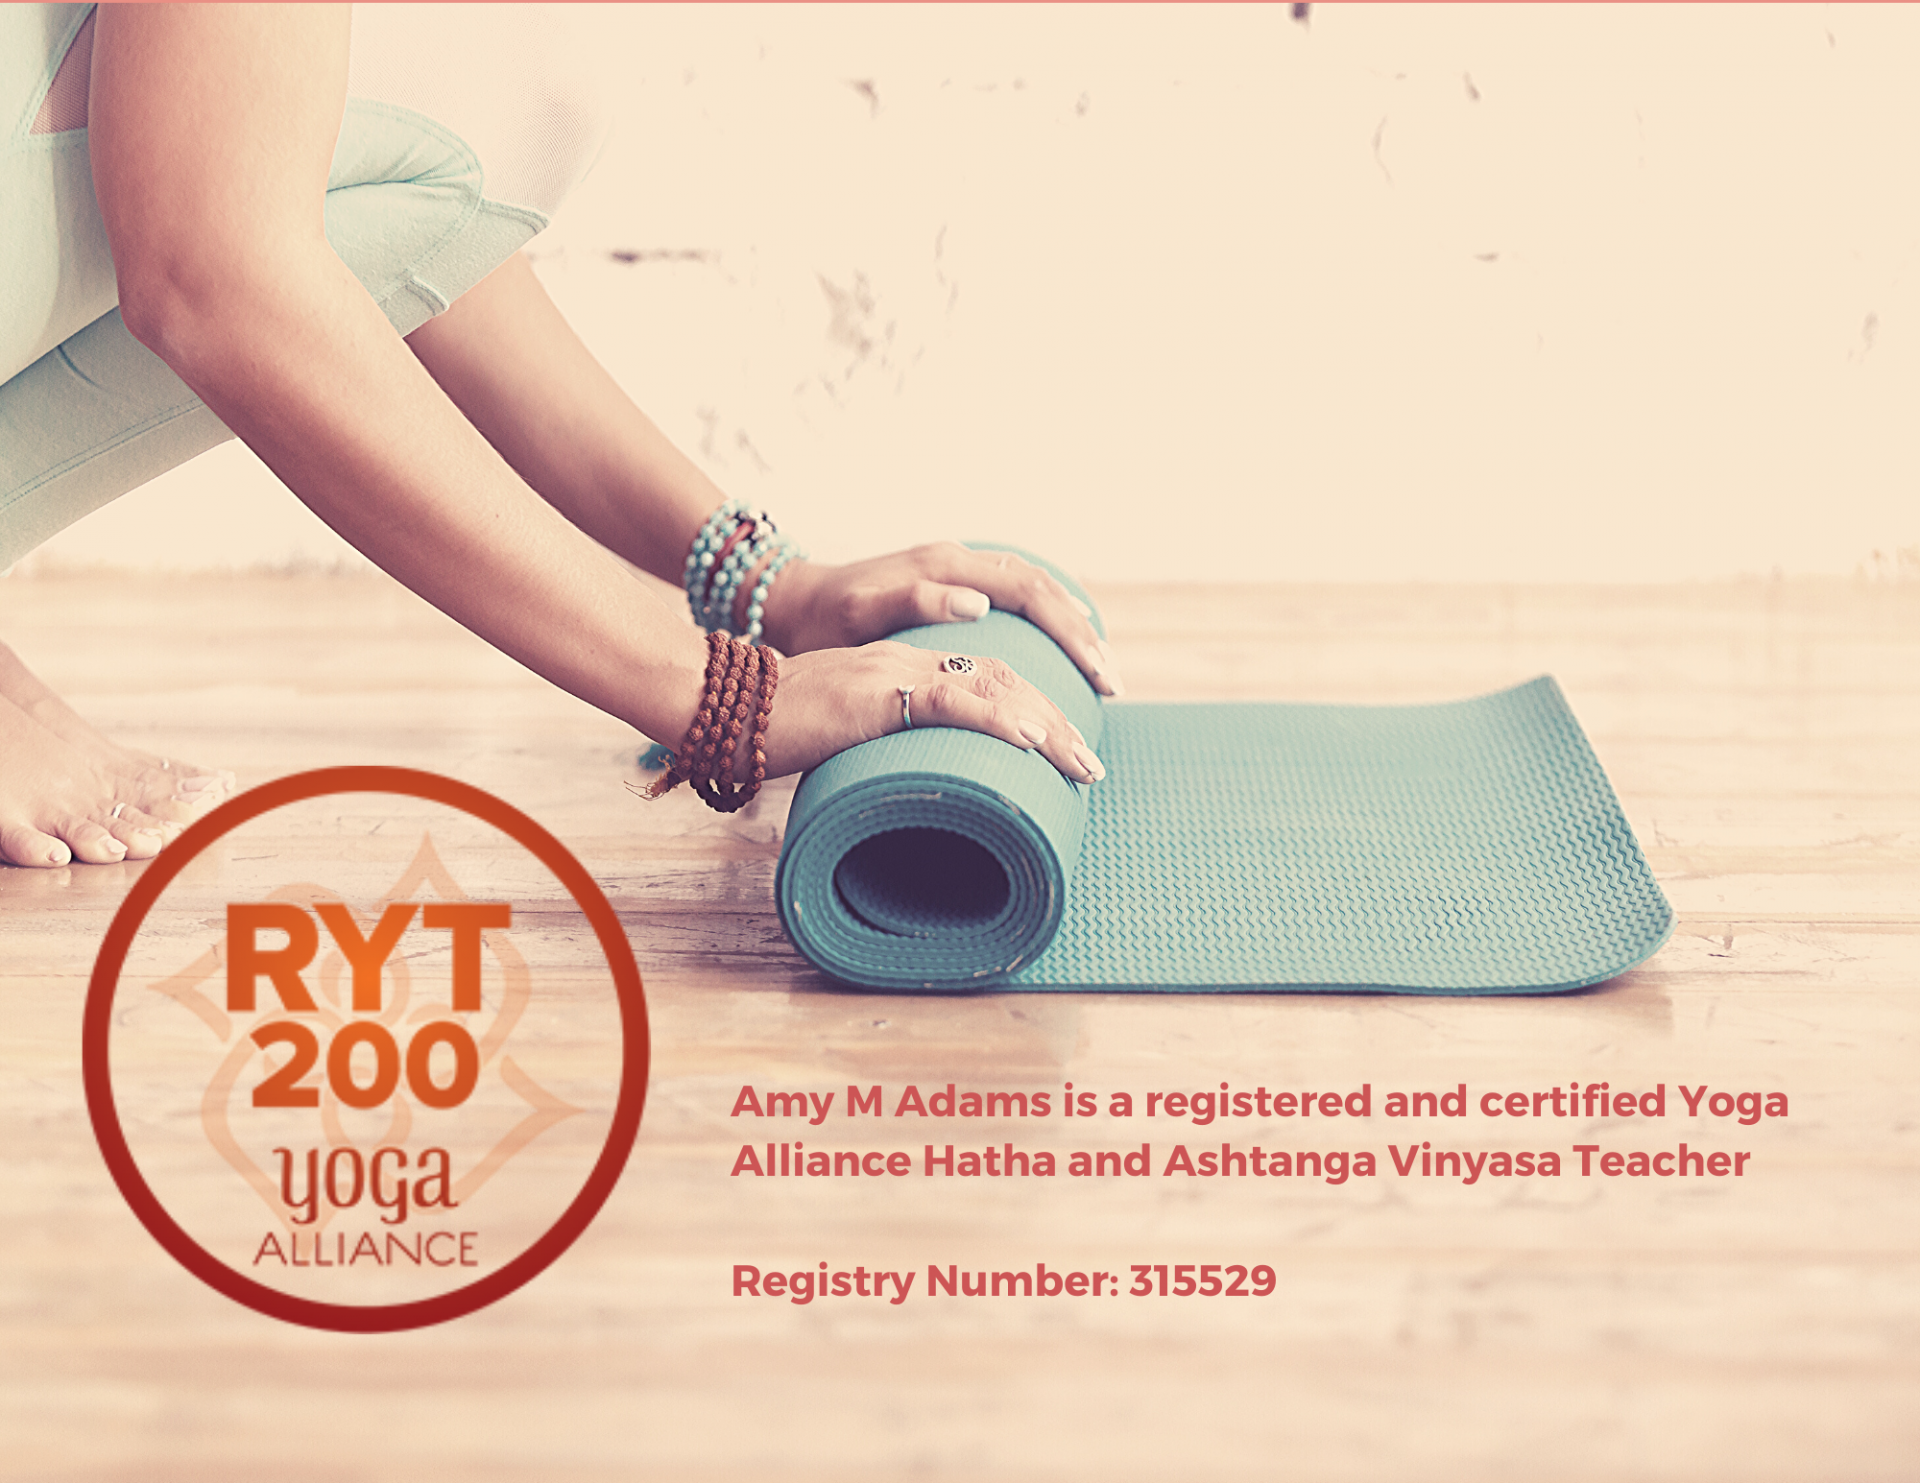 Amy M Adams is a registered Yoga Alliance Member and Teacher